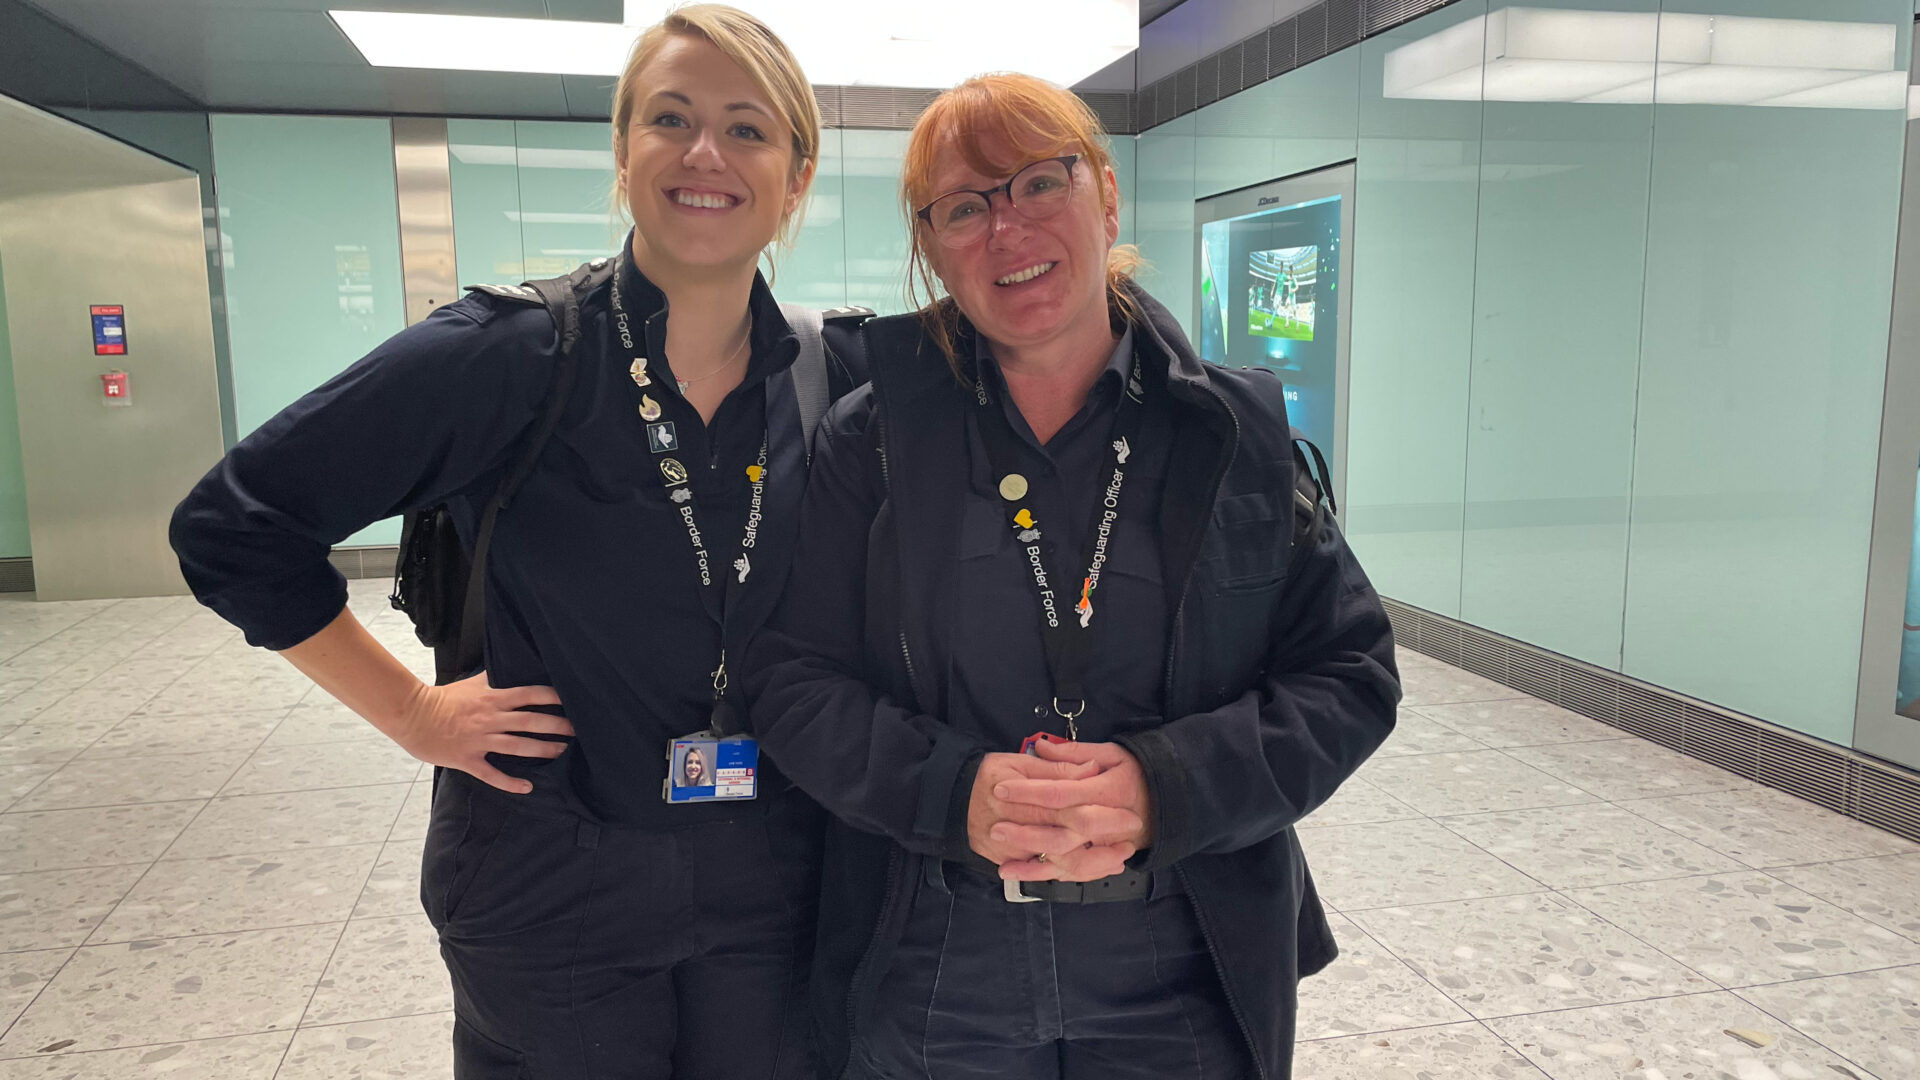 Two uniformed, female border force agents smile at the camera after a successful operation